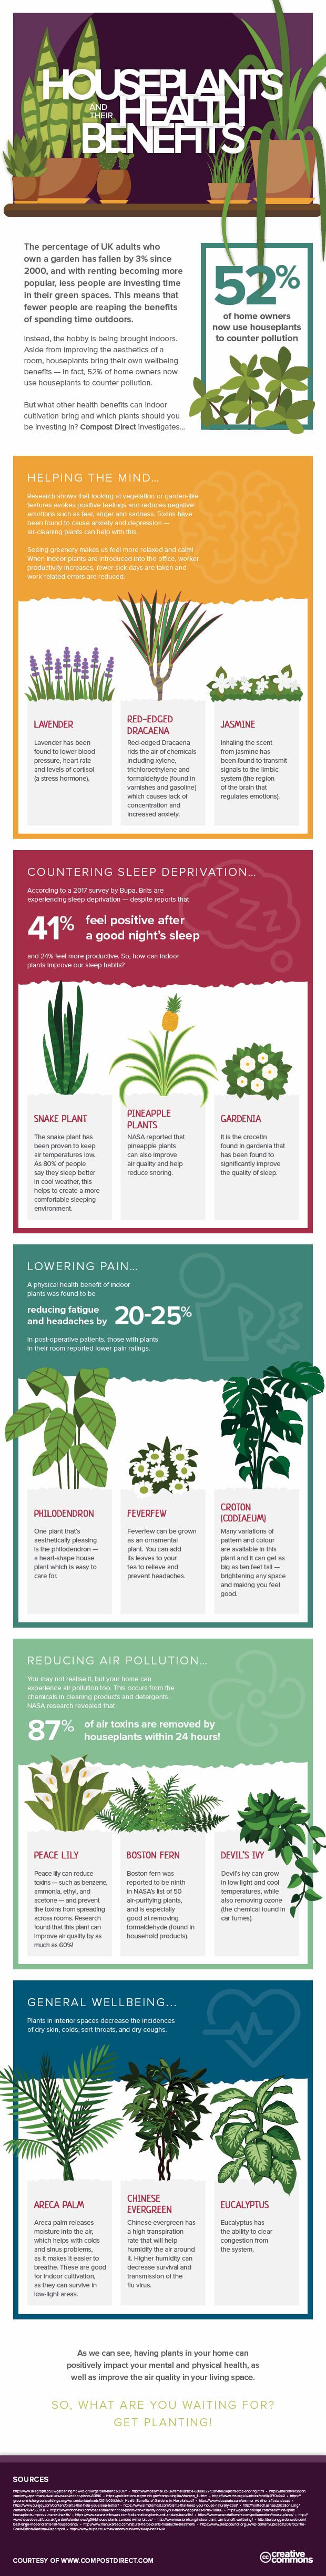 infographic - house plants and their health benefits - Compost Direct